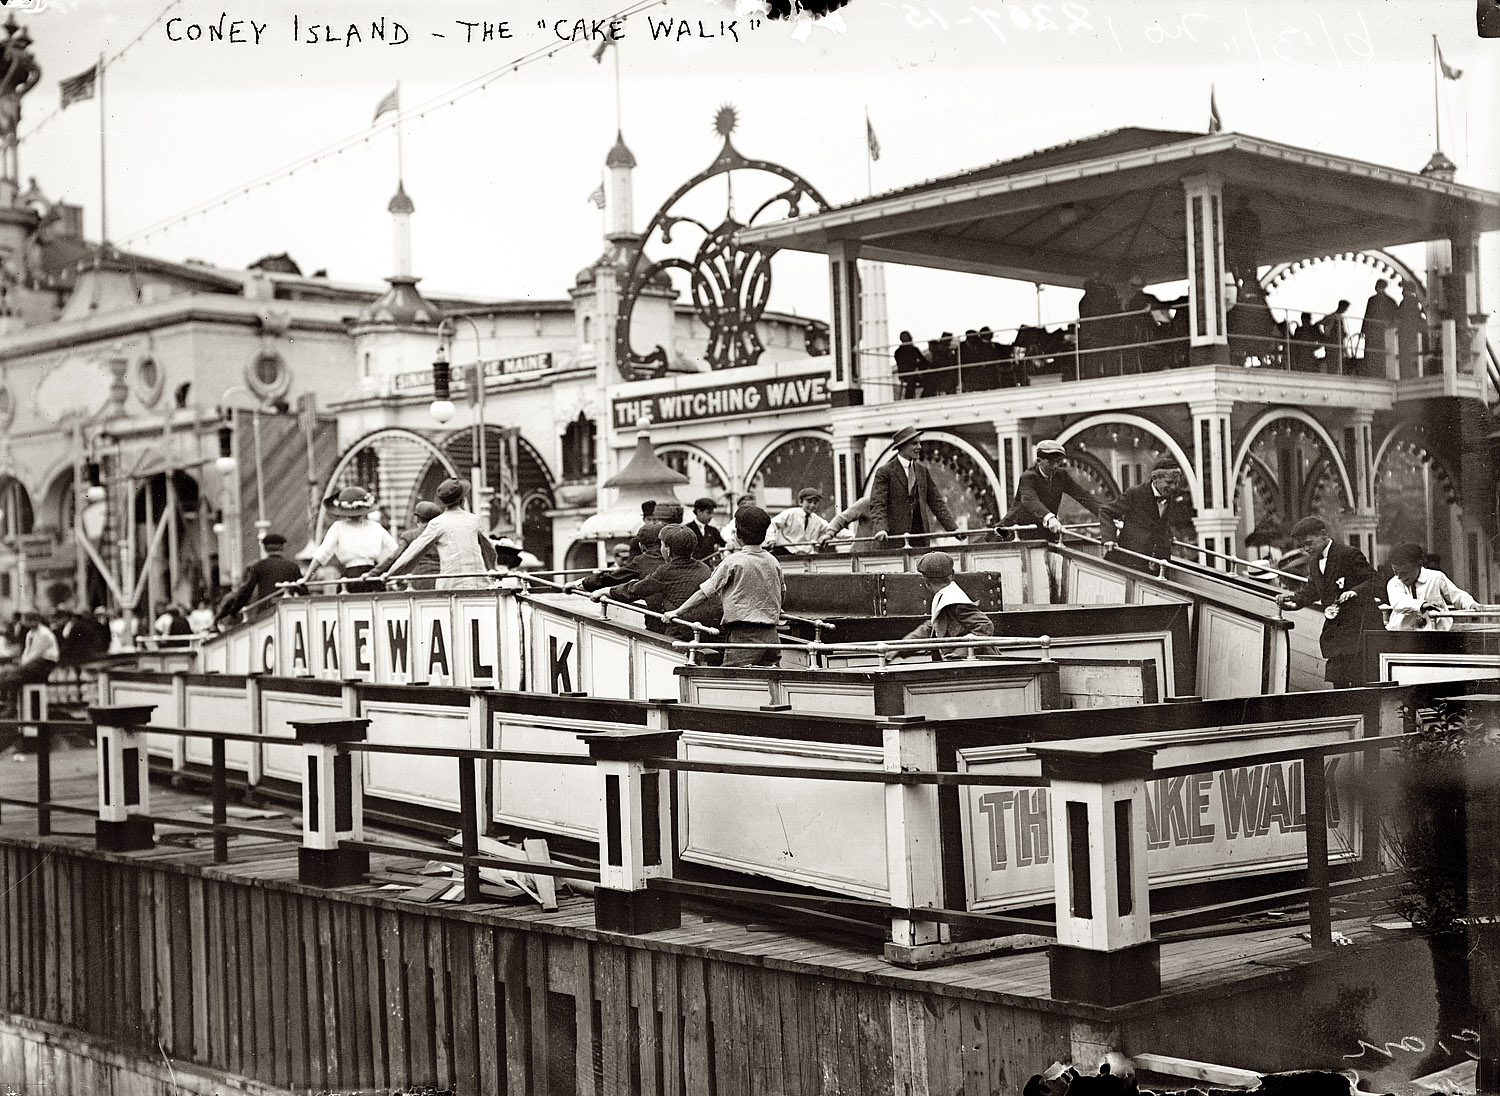 June 13, 1911. The Cake Walk at Luna Park on Coney Island. View full size. 5x7 glass negative, George Grantham Bain Collection. Who can describe this ride?